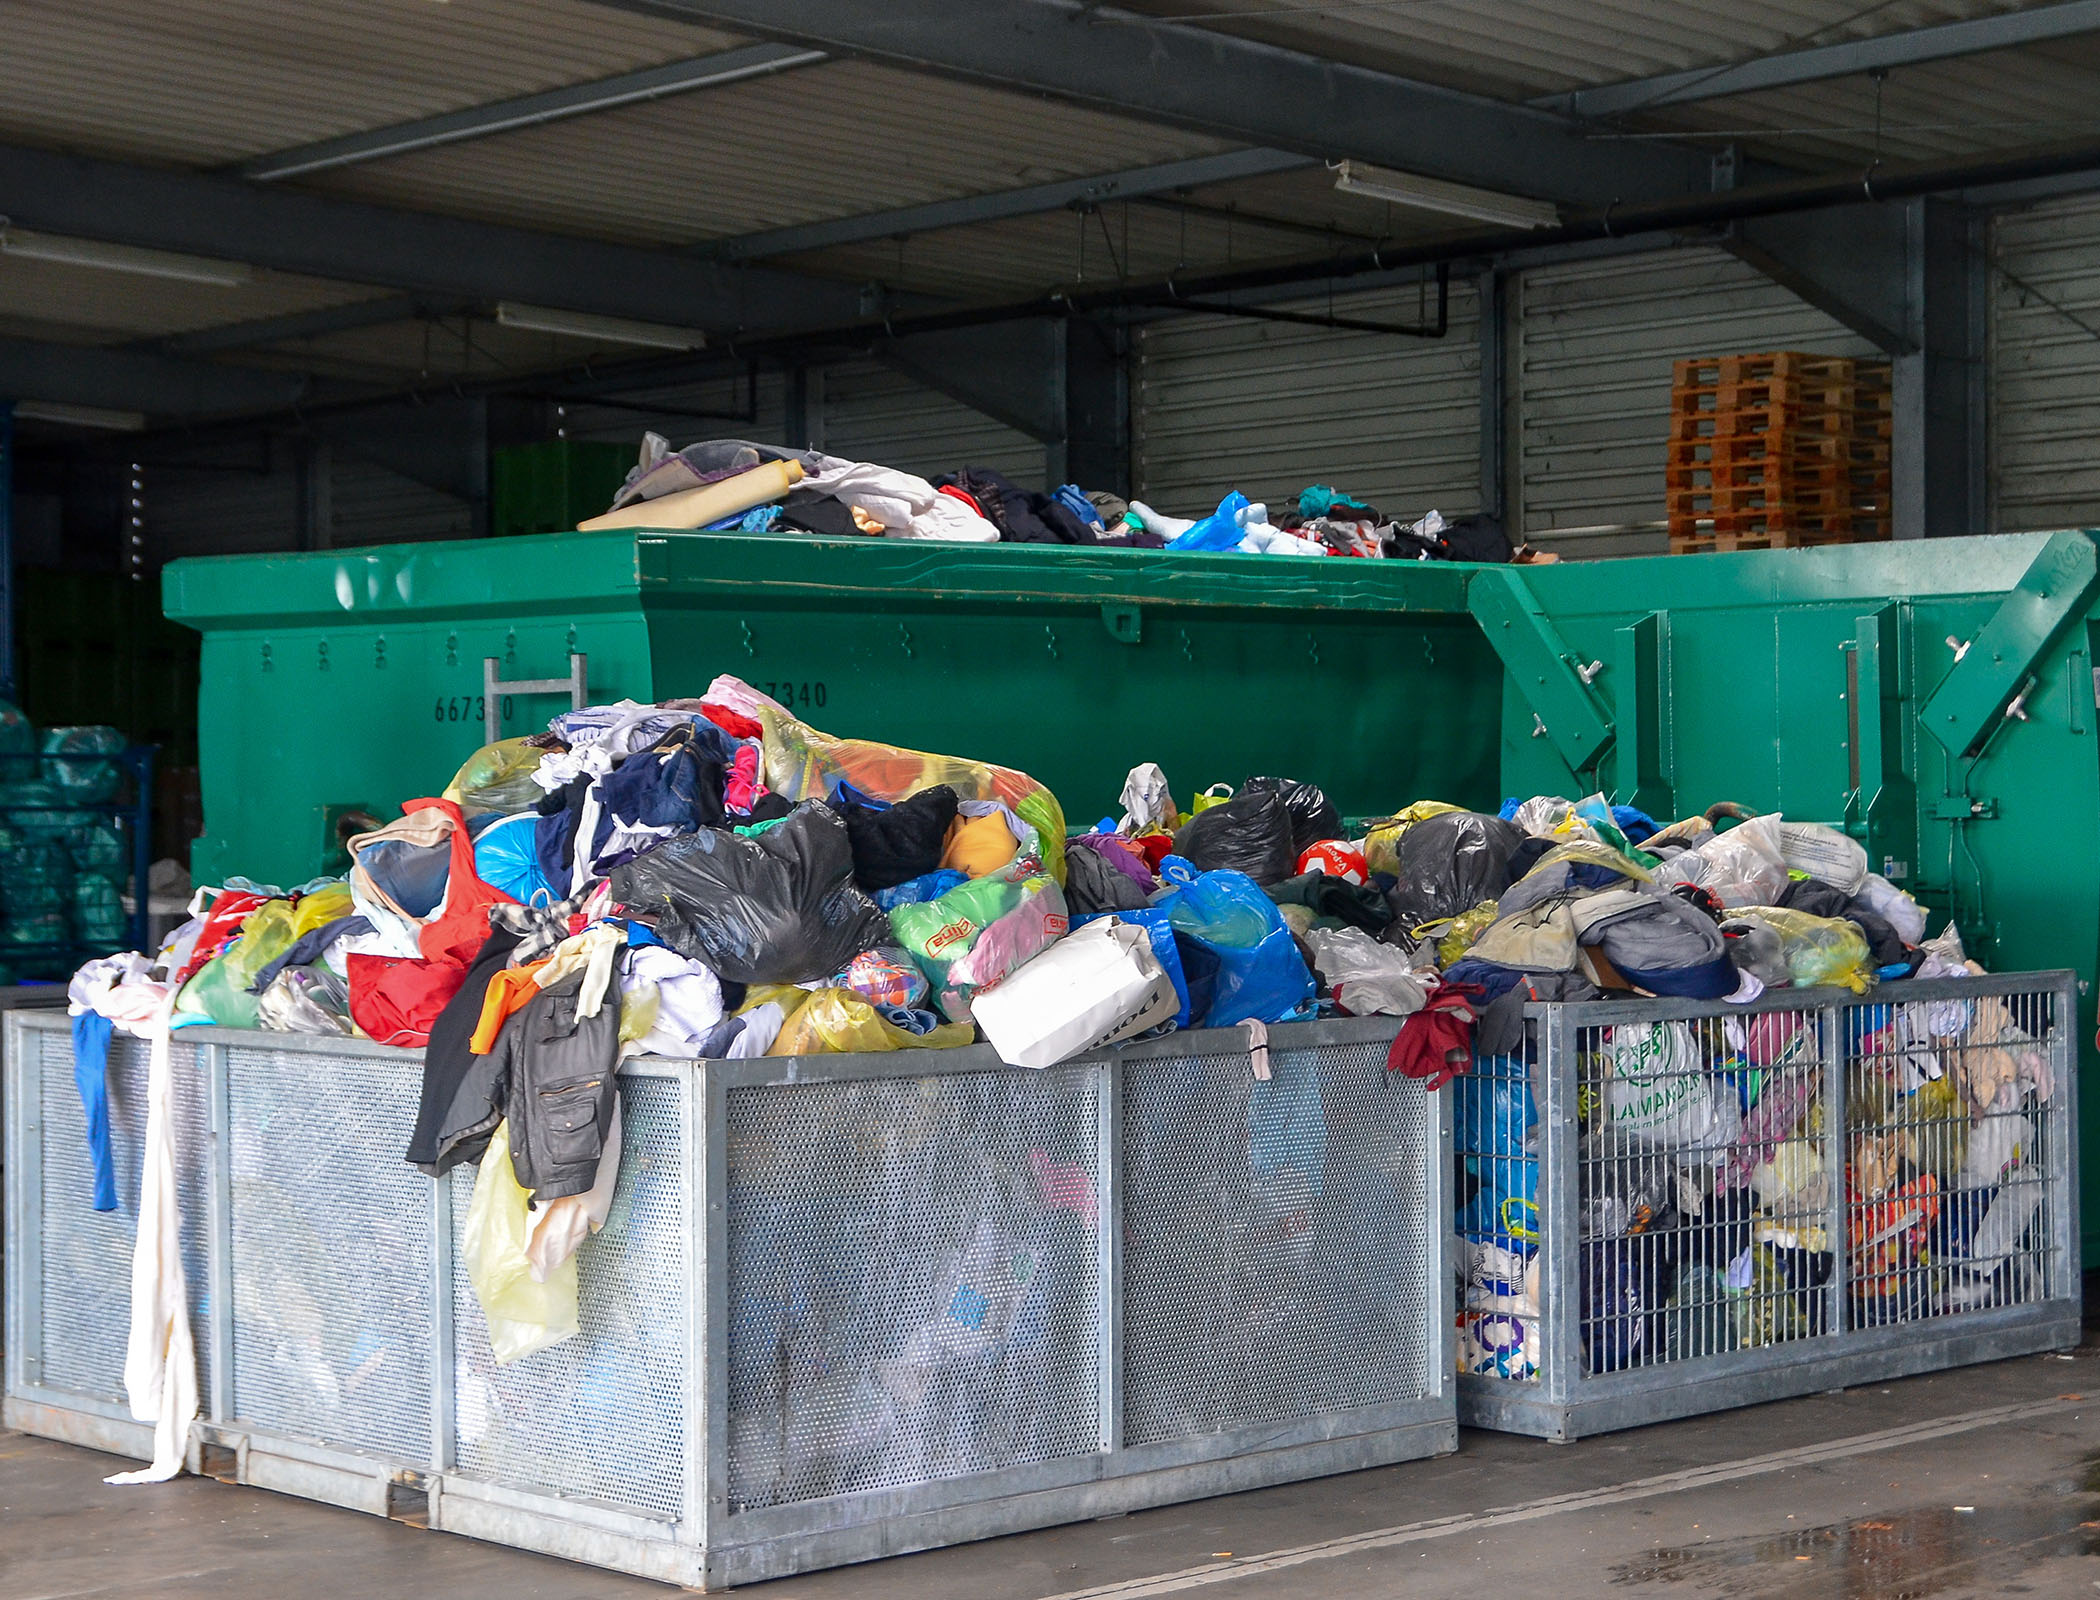 Emissions from waste textiles could be cut with chemical sorting process